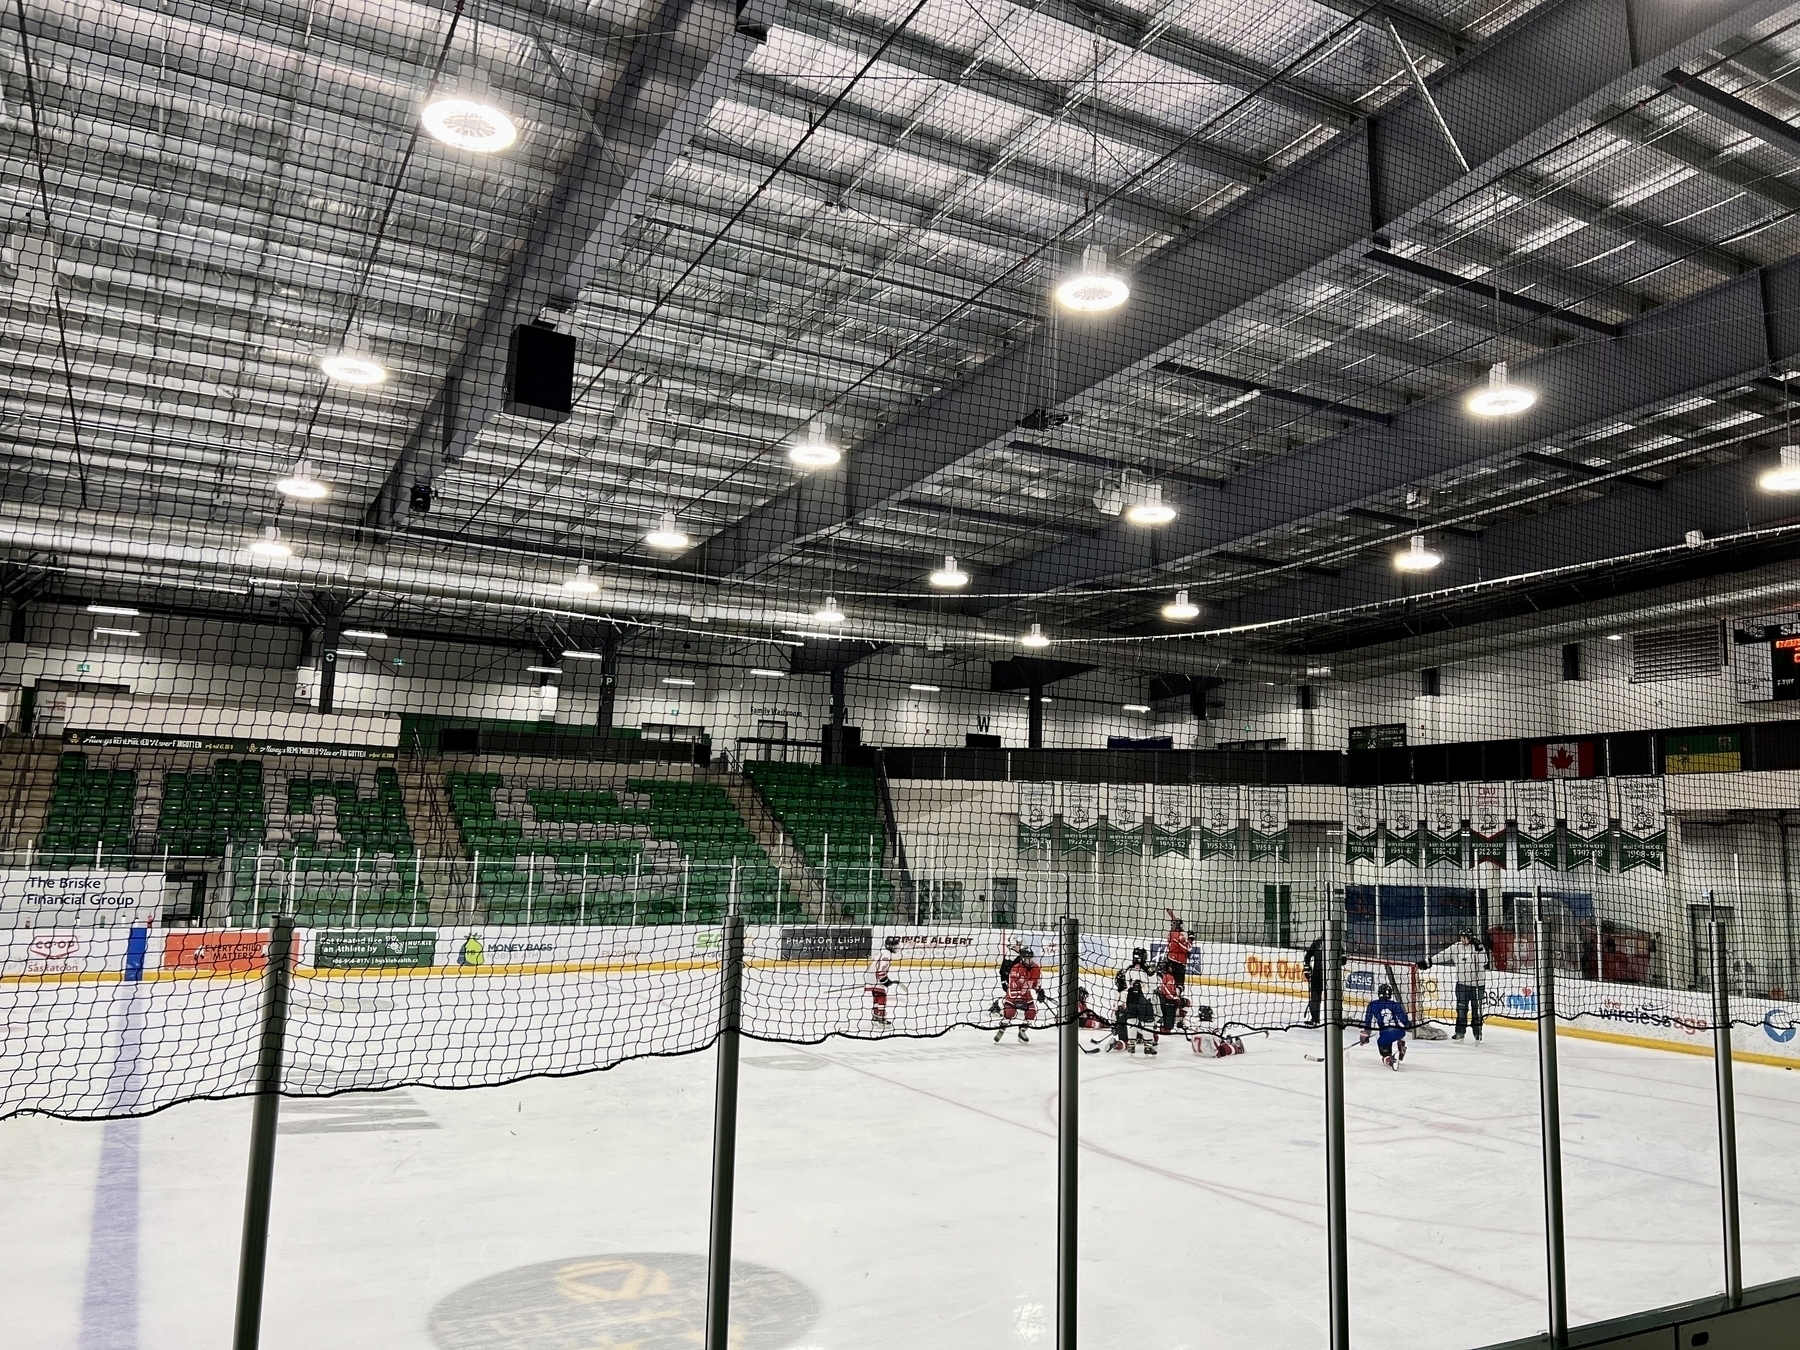 A kid’s hockey team practicing on the ice in an otherwise empty rink. 